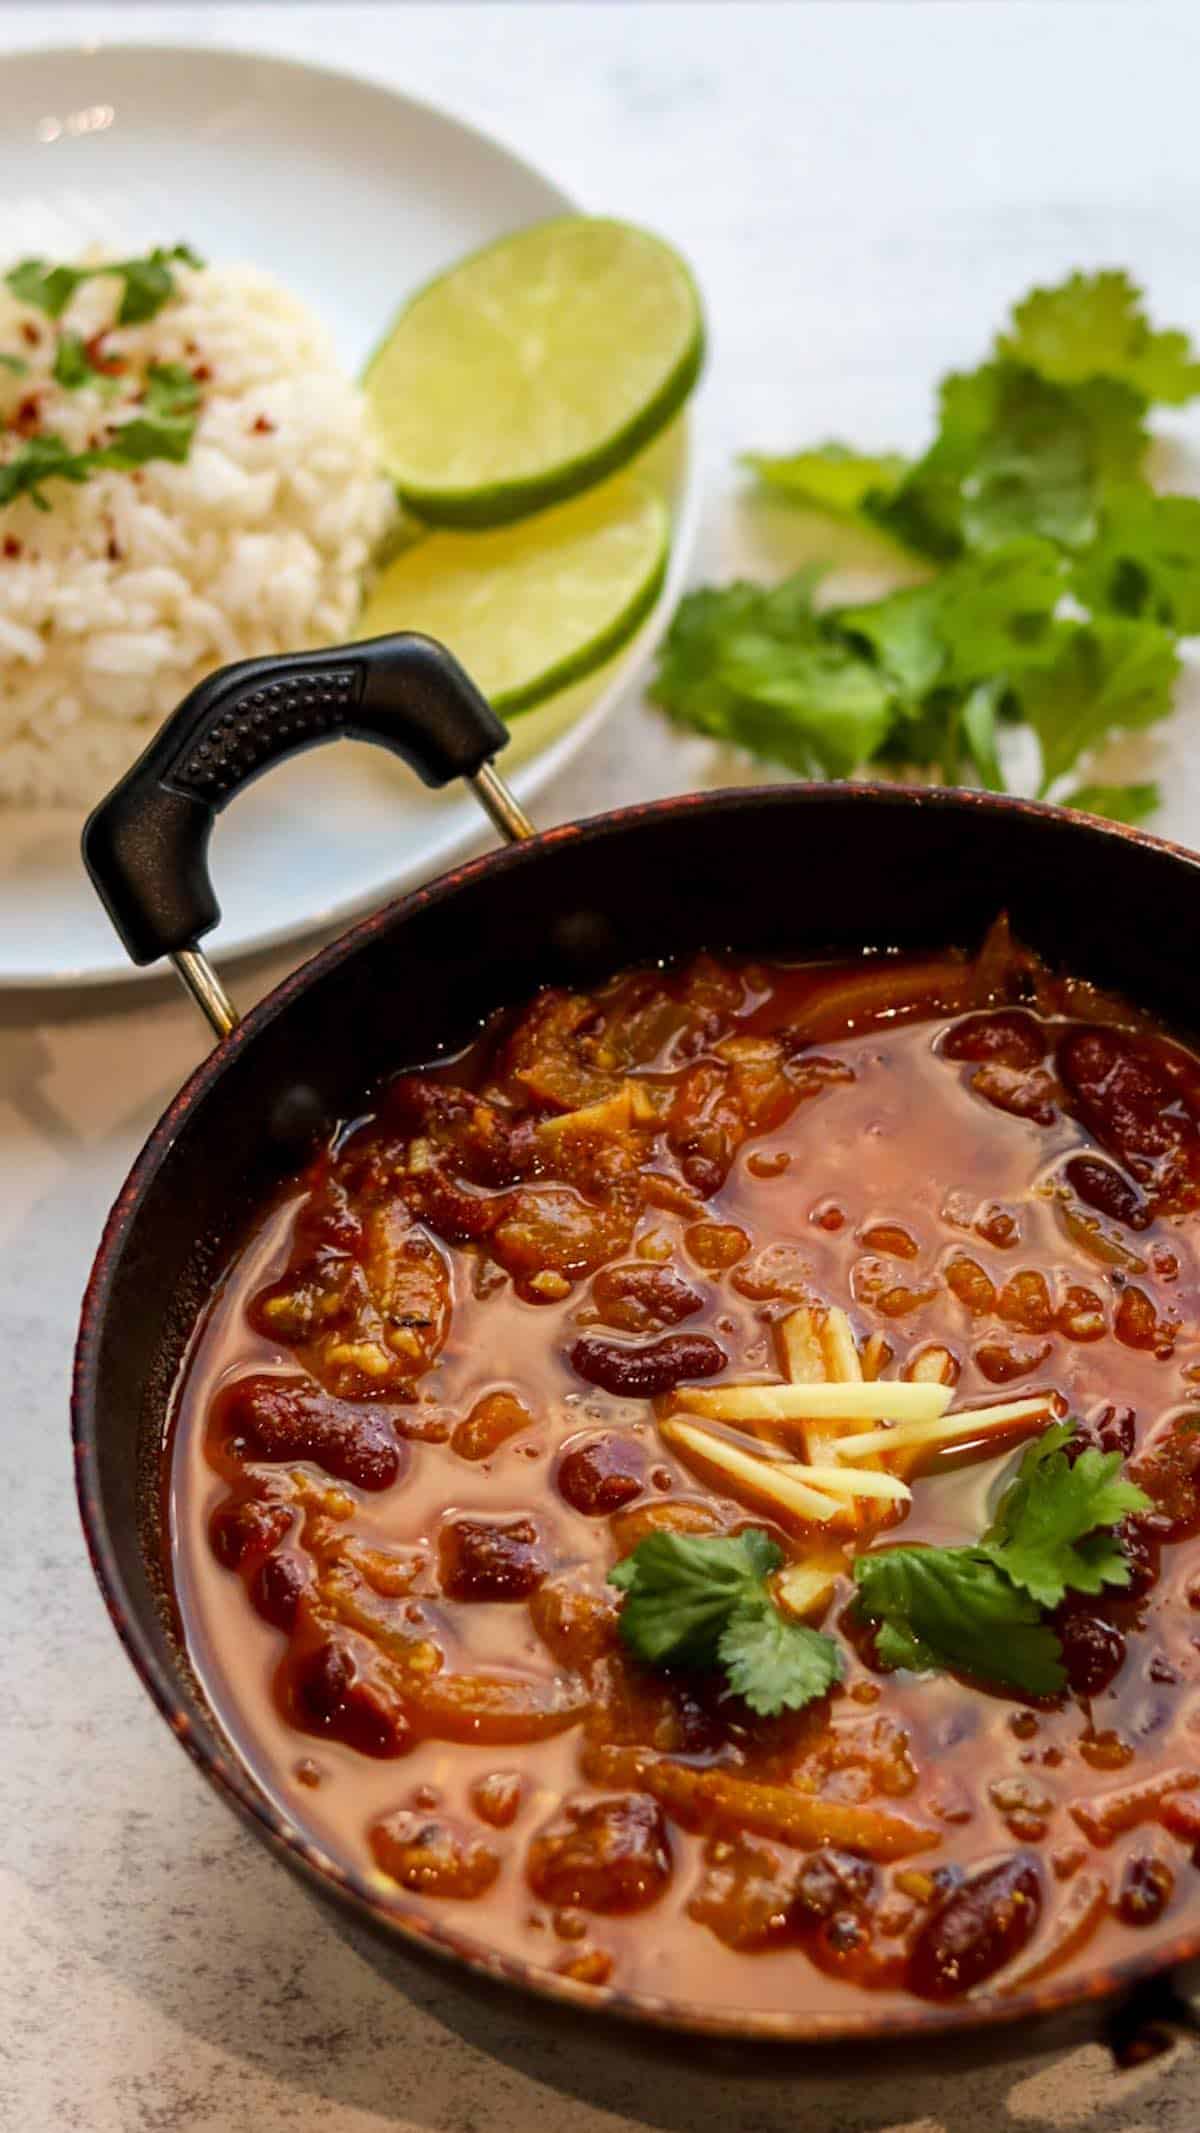 Mouth-watering rajma/kidney beans recipe that is very easy to make, requires simple ingredients and is an ultimate comfort food.